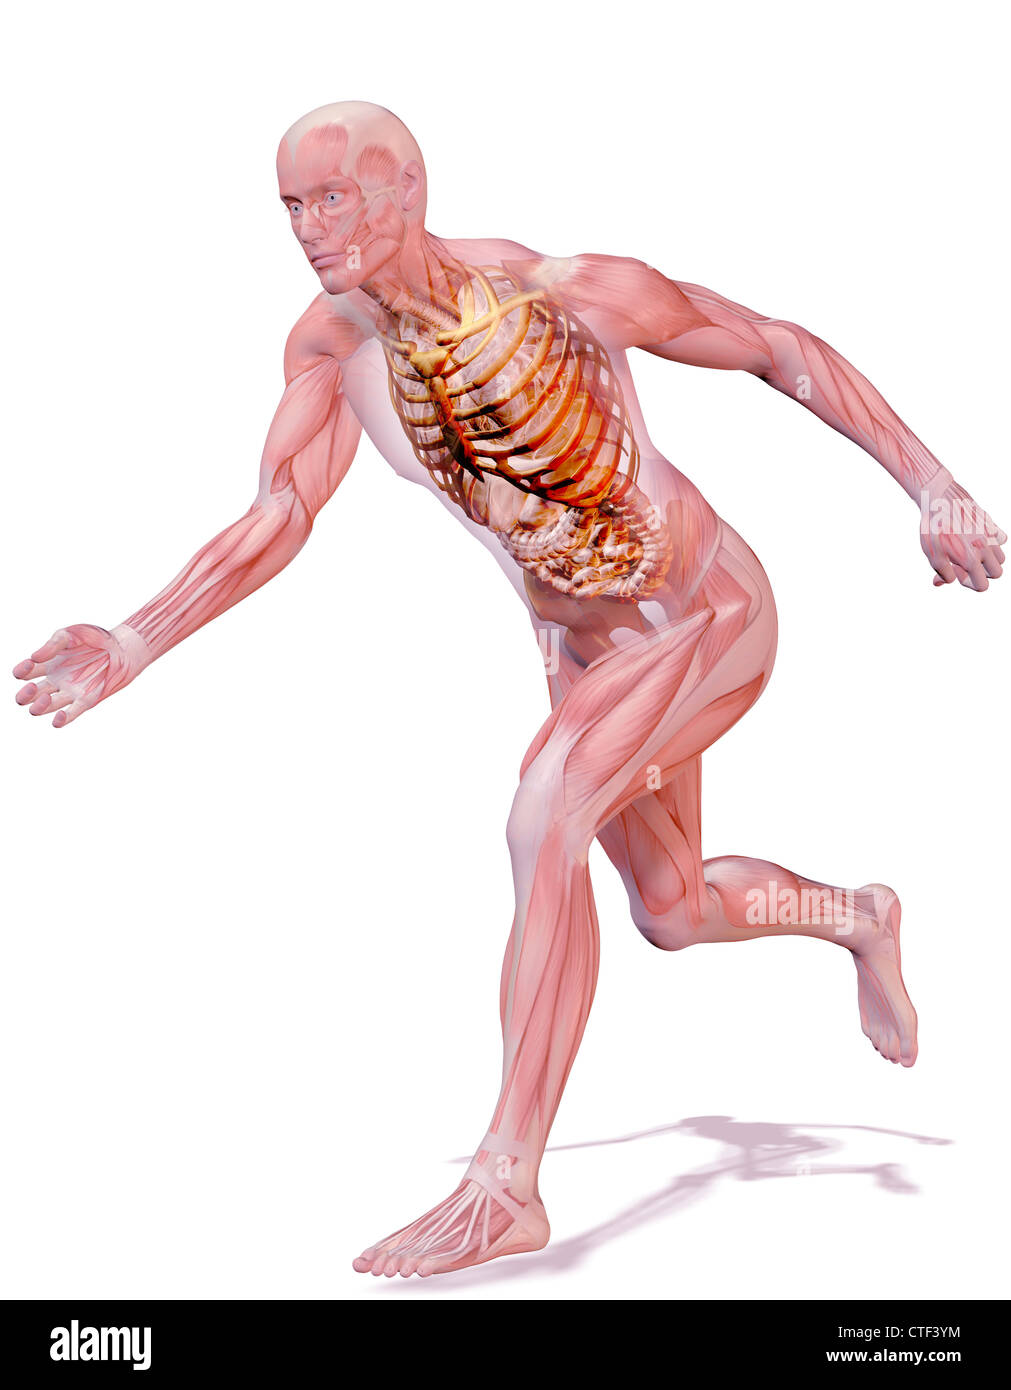 Digitally generated image of running human representation with inner human muscle visible Stock Photo